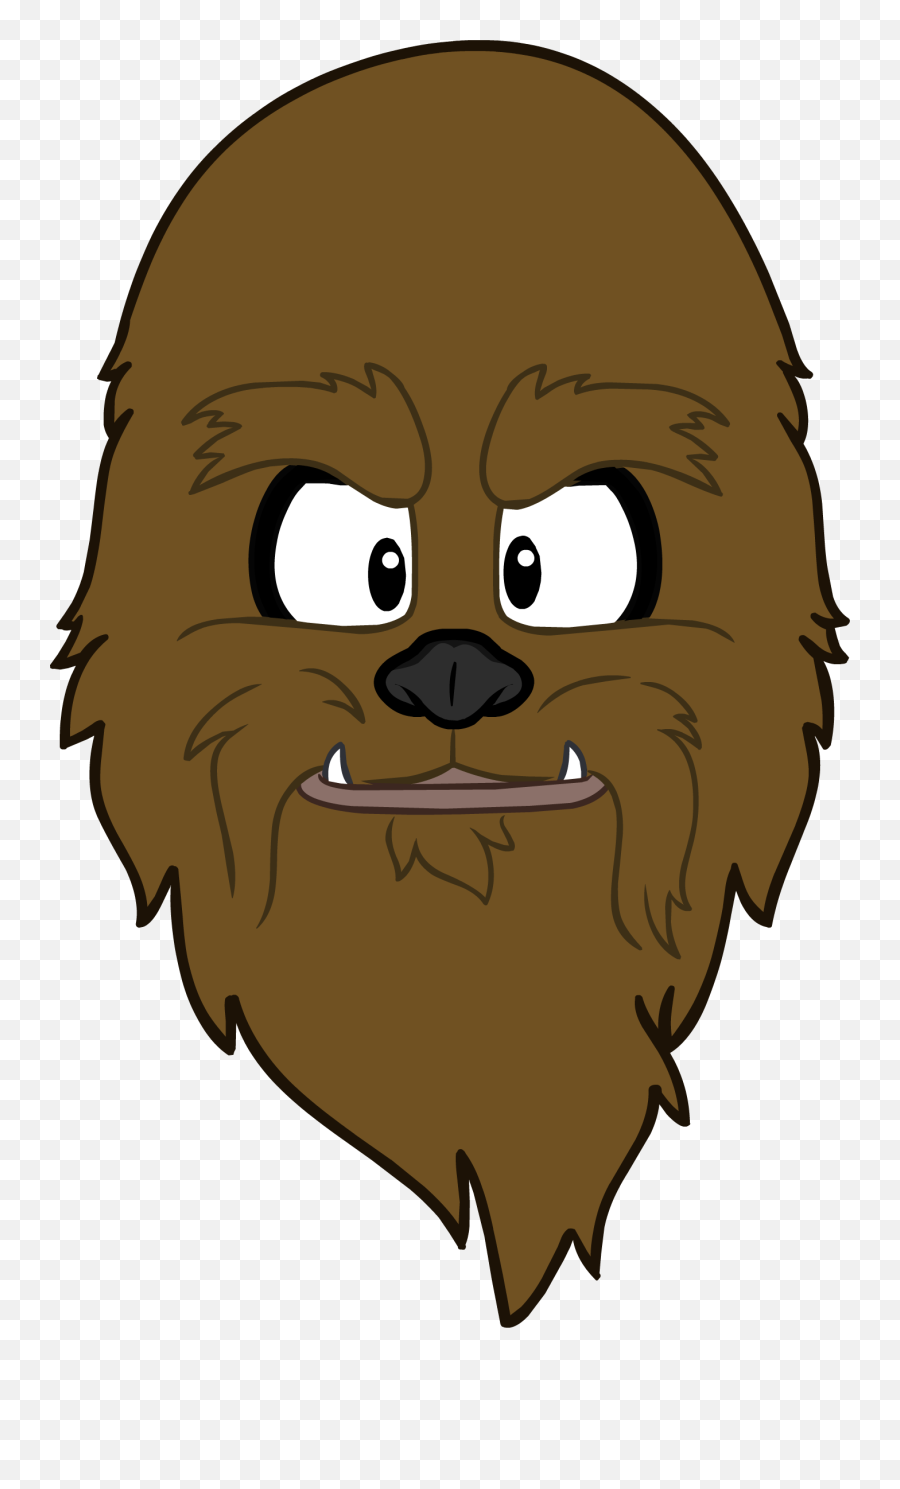 Free Transparent Chewbacca Png Download - Clipart Chewbacca Head Emoji,Chewbacca Png